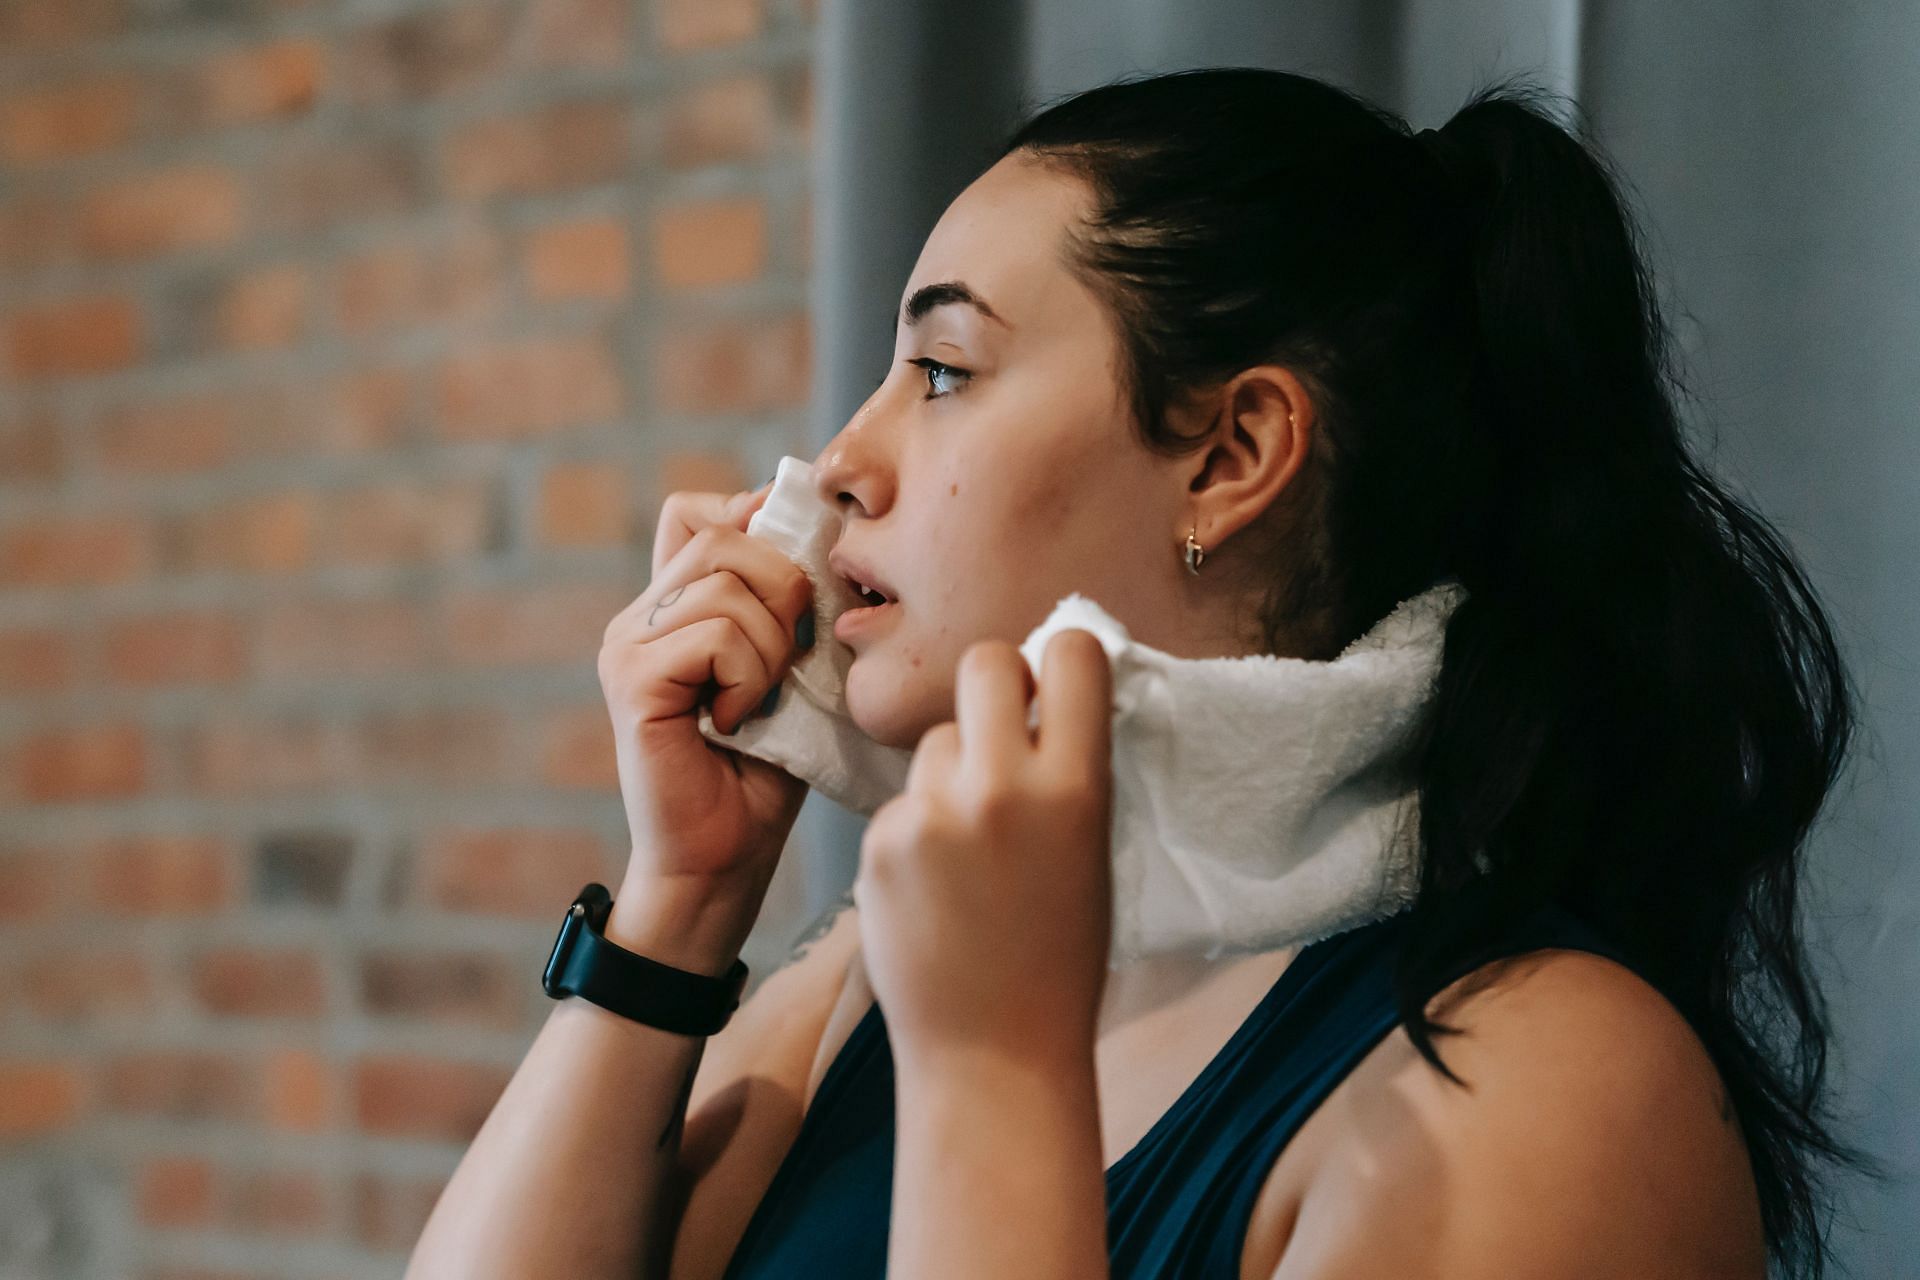 Sweating is often linked with weight loss--is that true? (Image via Pexels/Andres Ayrton)